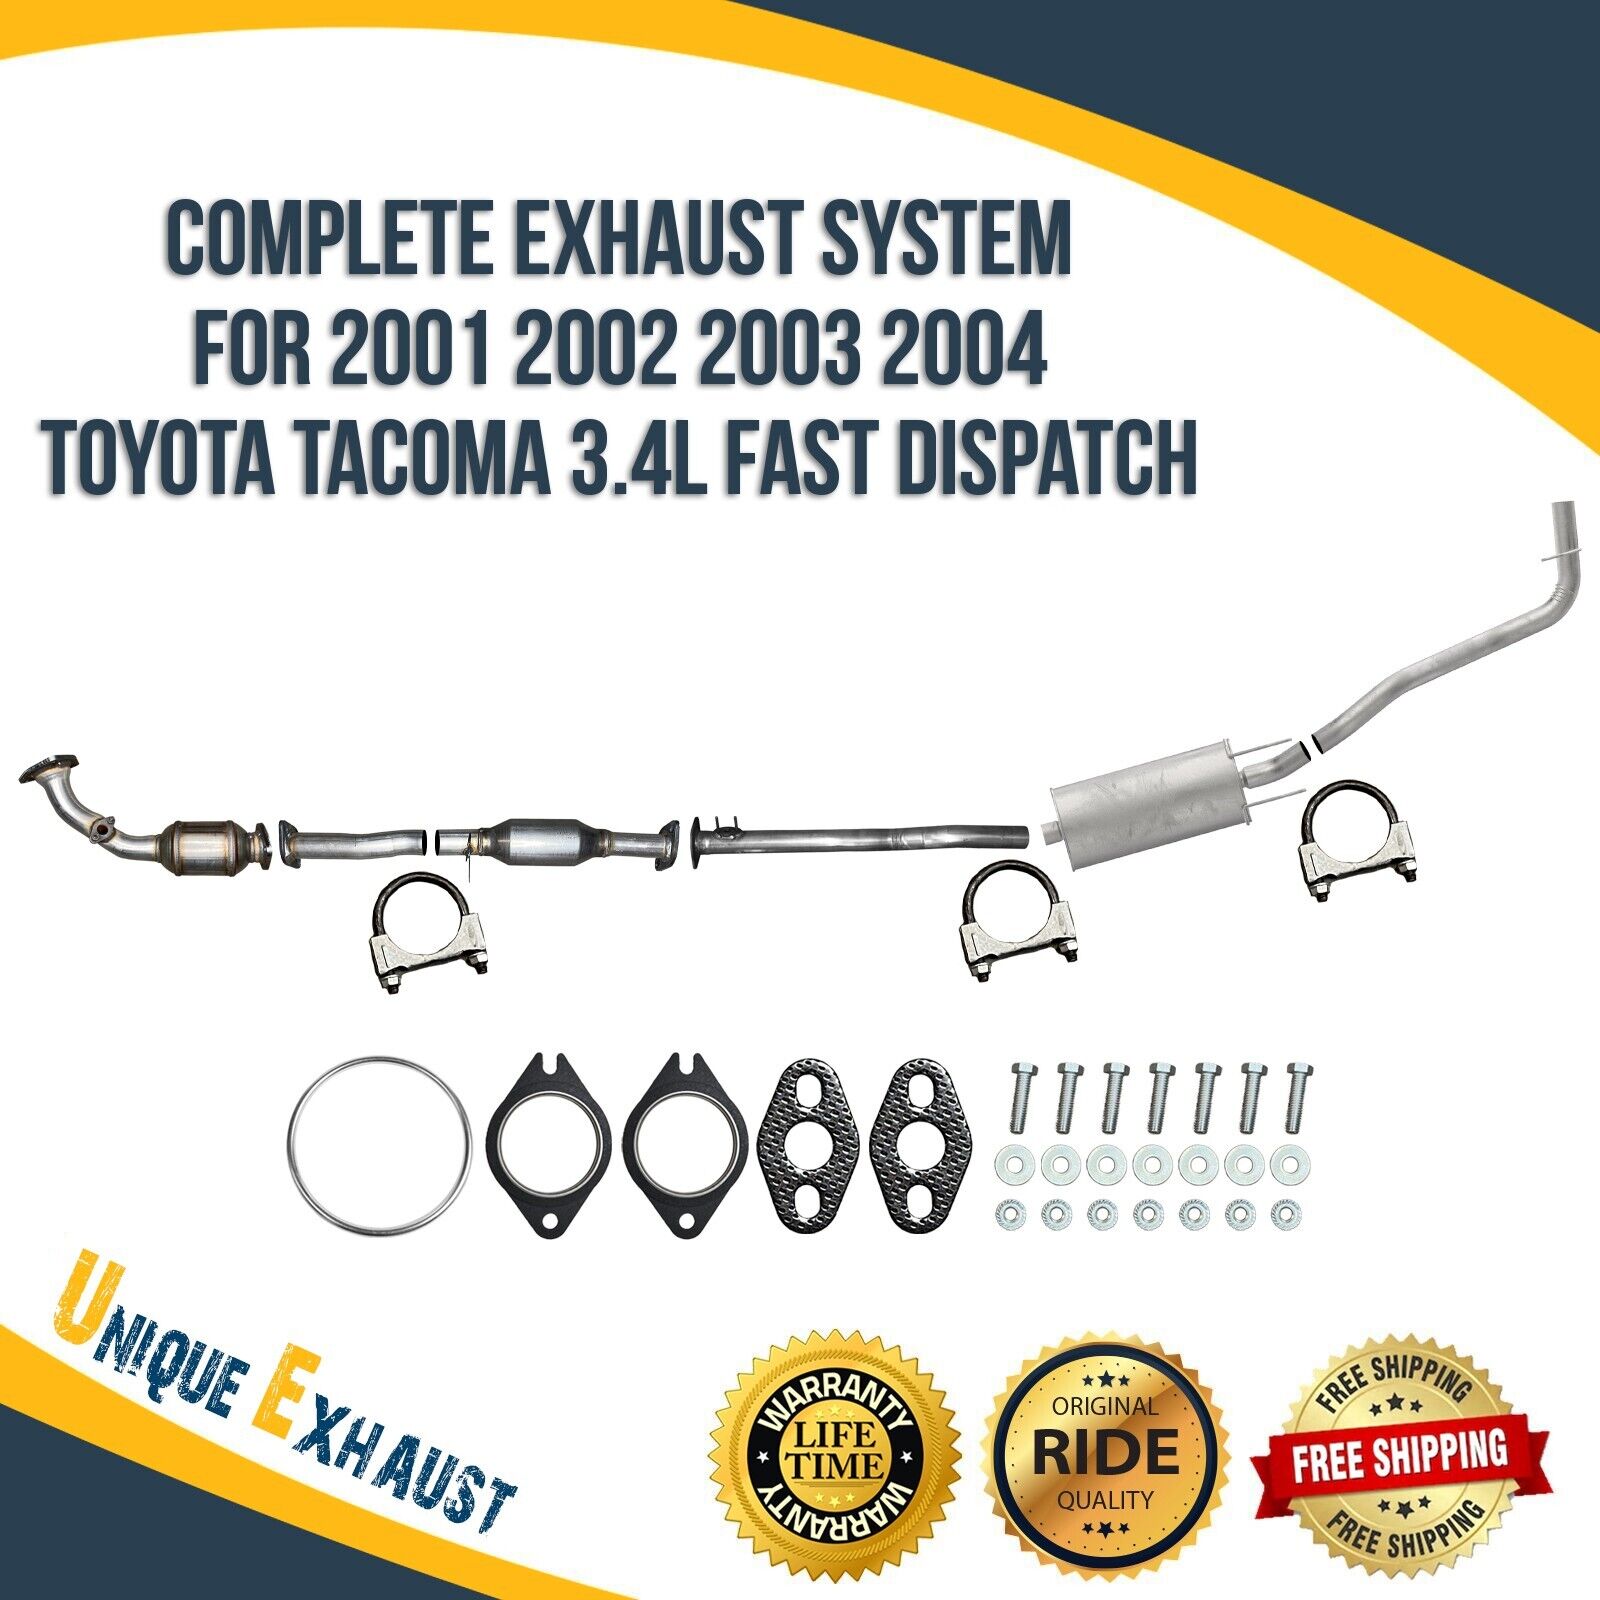 Complete Exhaust System for 2001 2002 2003 2004 Toyota Tacoma 3.4L Fast Dispatch